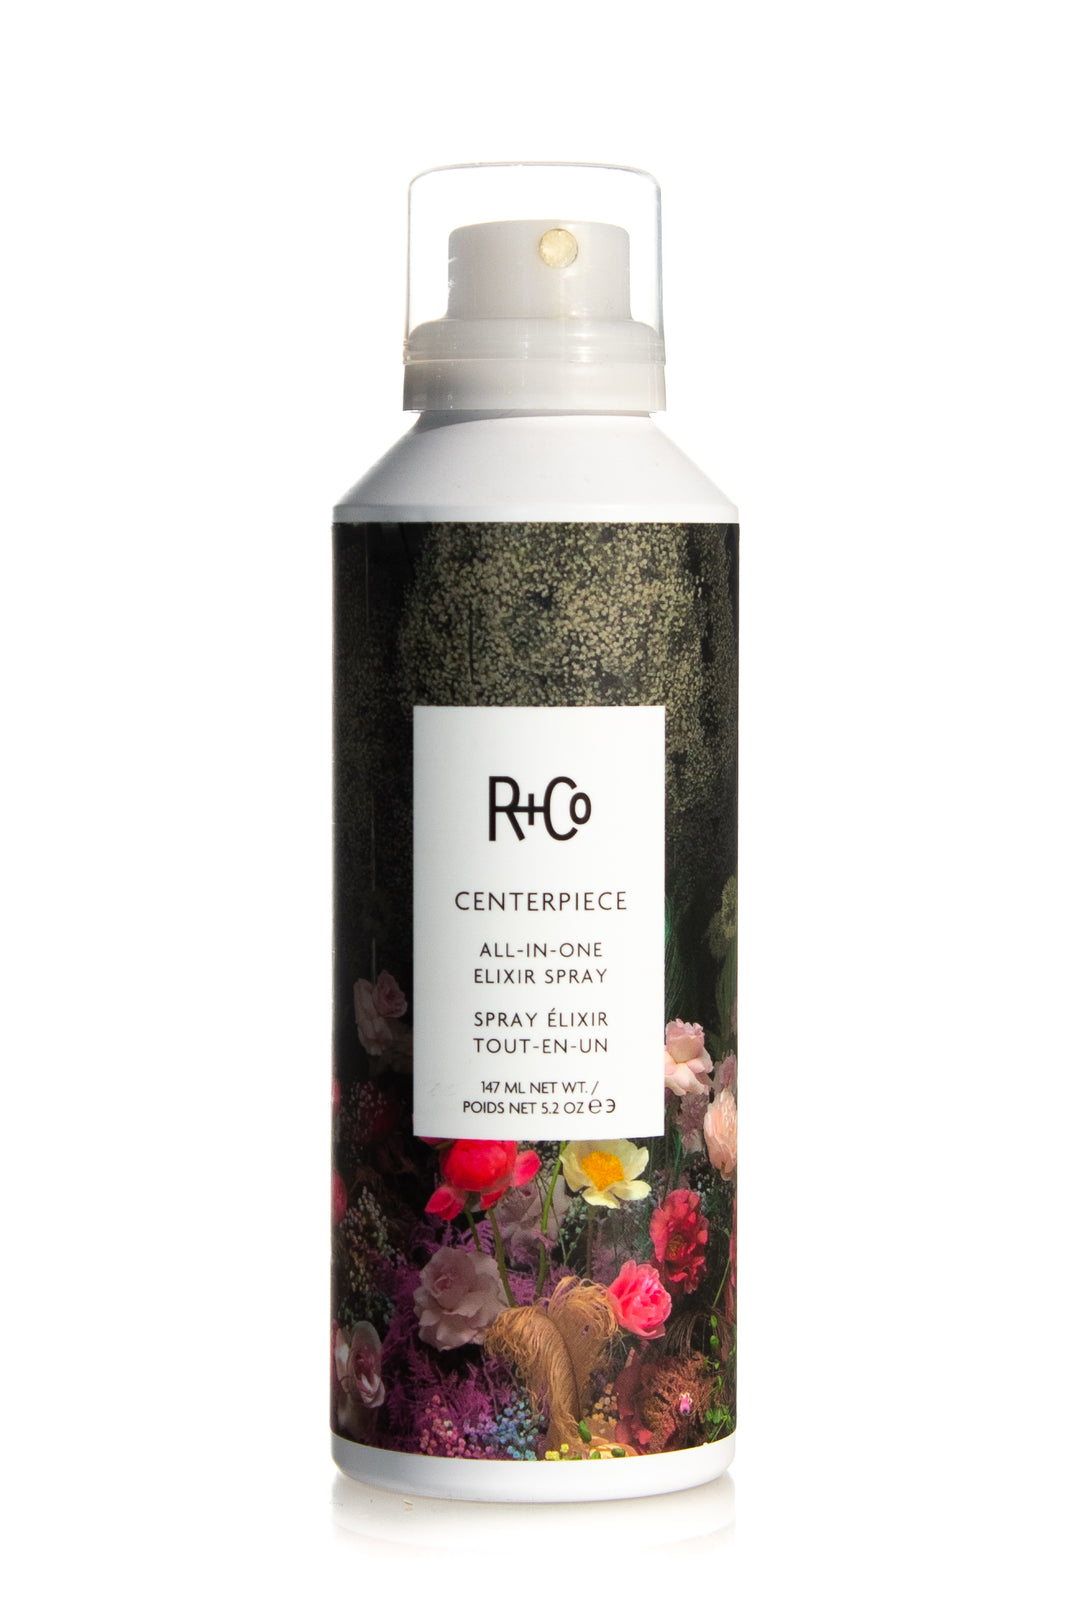 A single product that does it all. This lightweight, multi-tasking styling spray is packed with rich oils to detangle, help fight frizz and hydrate while repairing and fortifying hair.  Can be used alone, layered under other products and to refresh styled or second day hair.